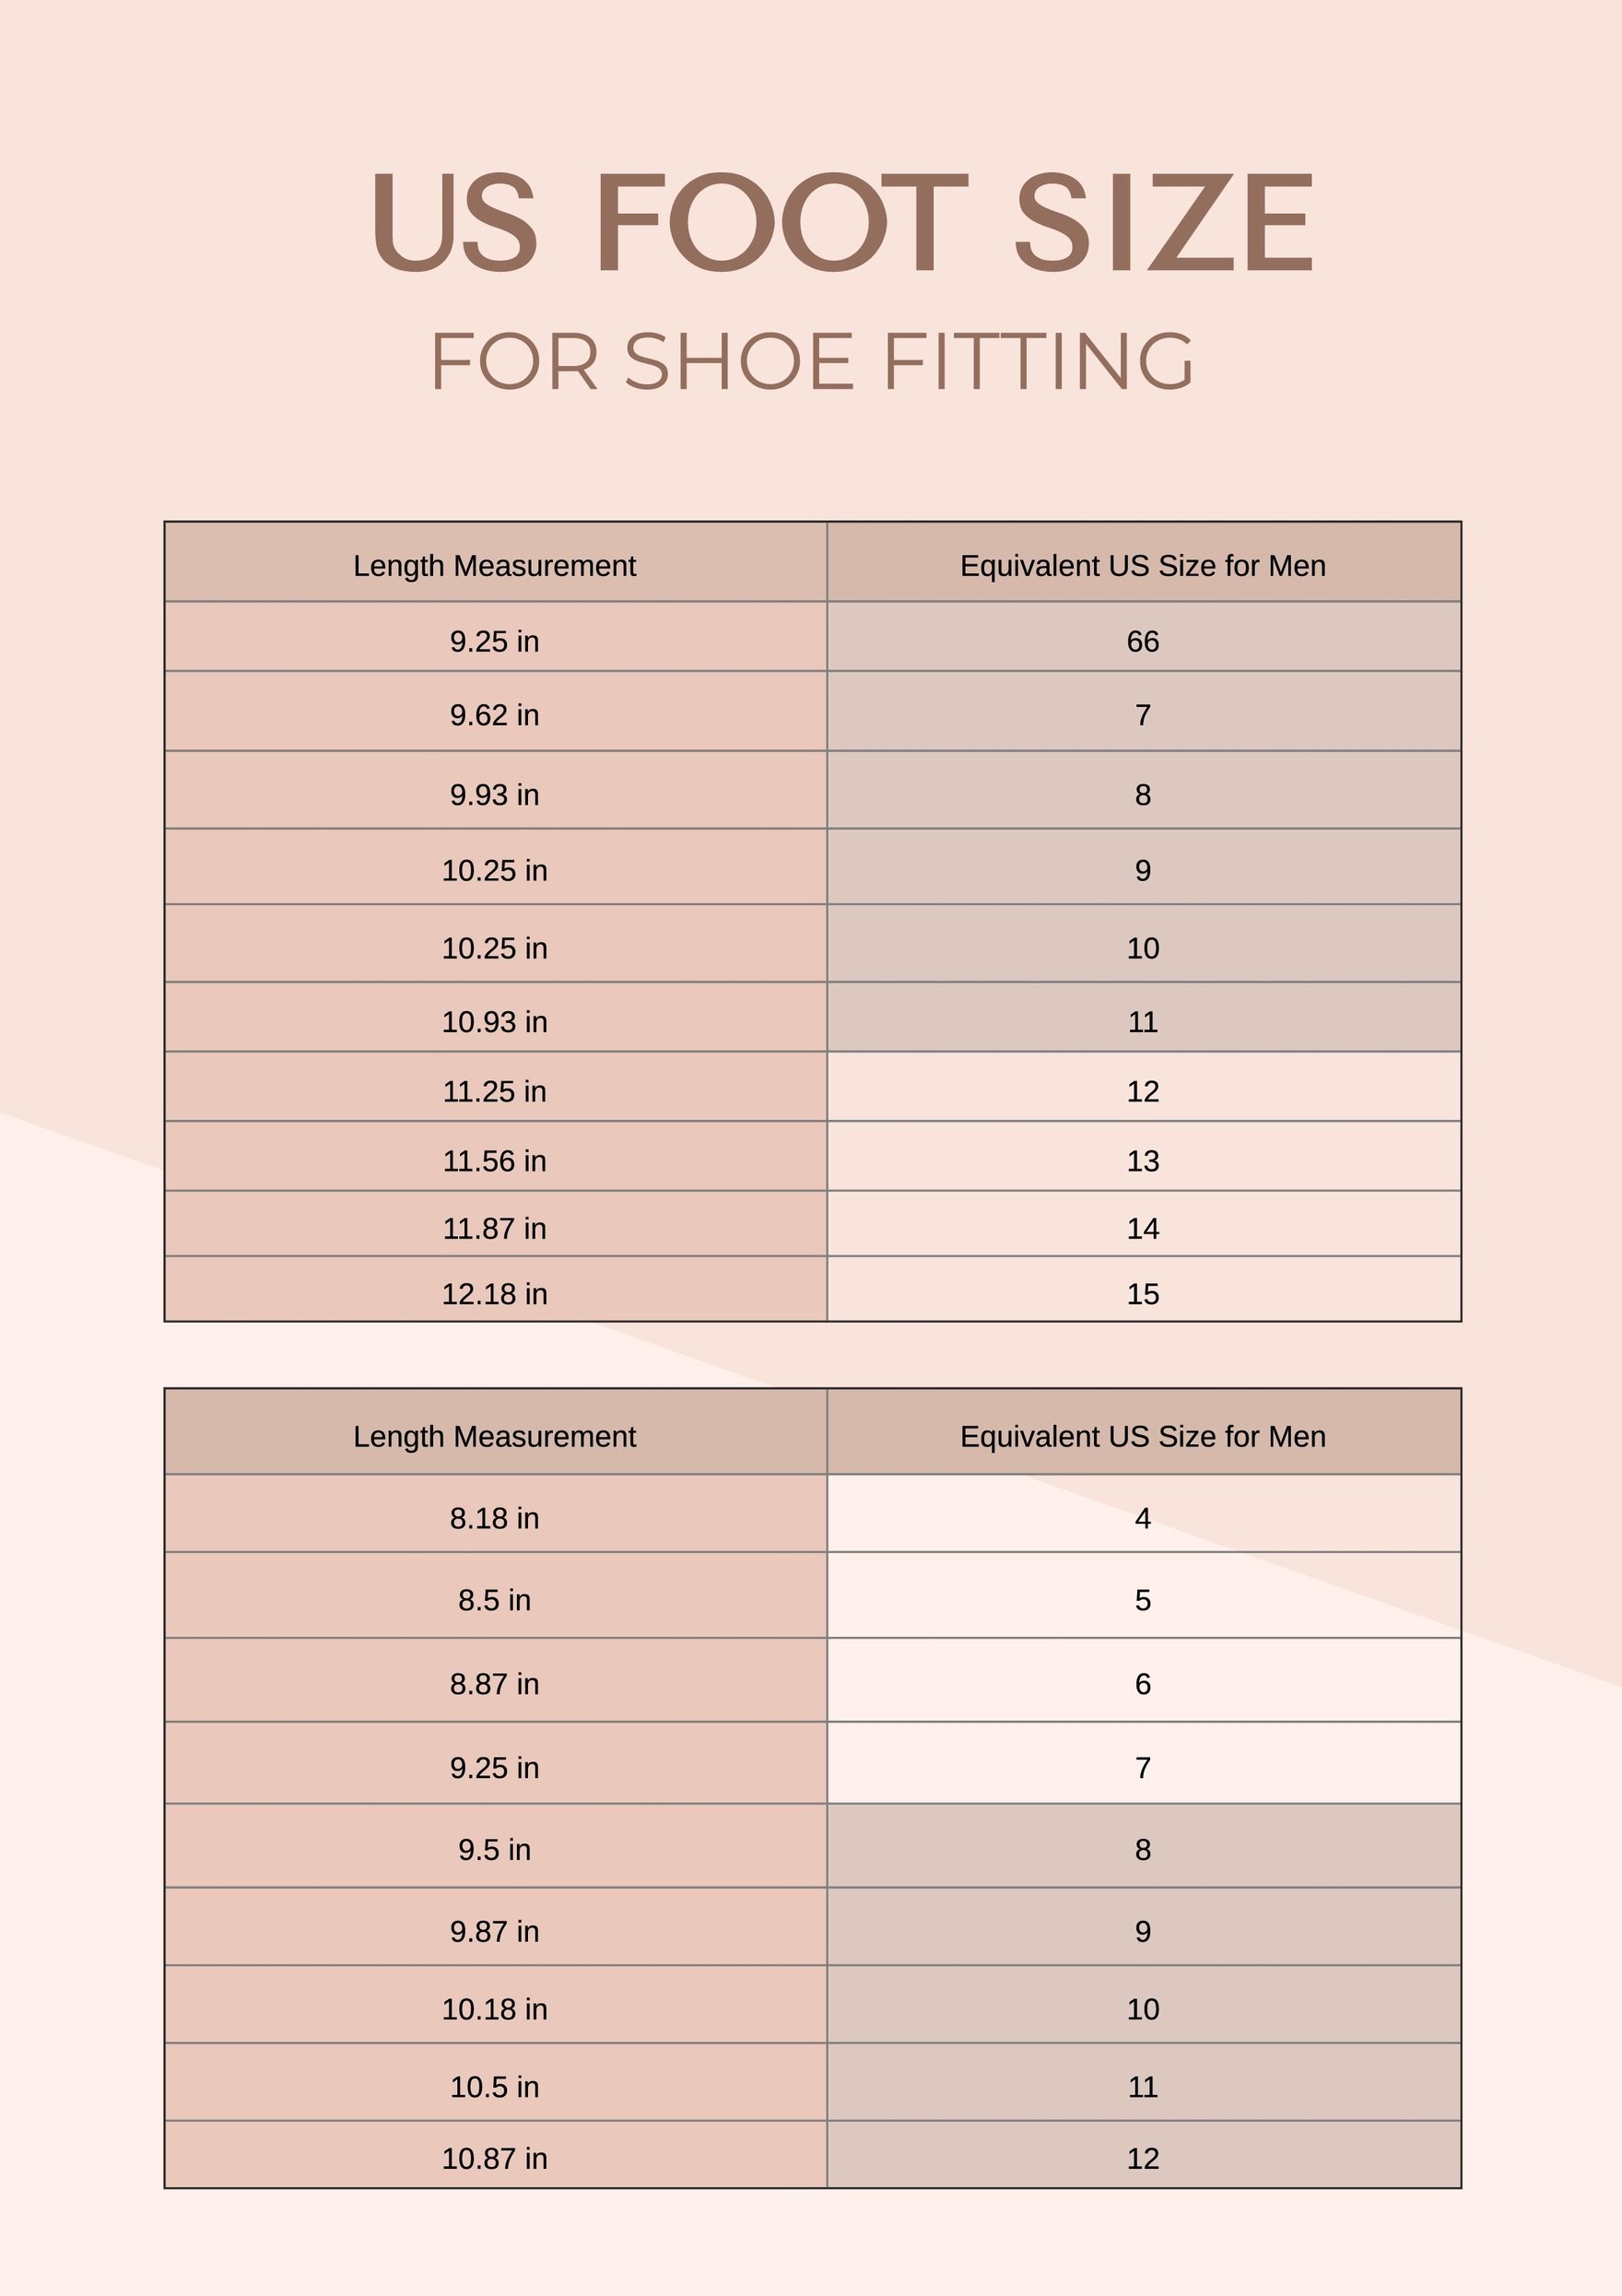 Free Us Foot Size Chart Download in PDF, | Template.net